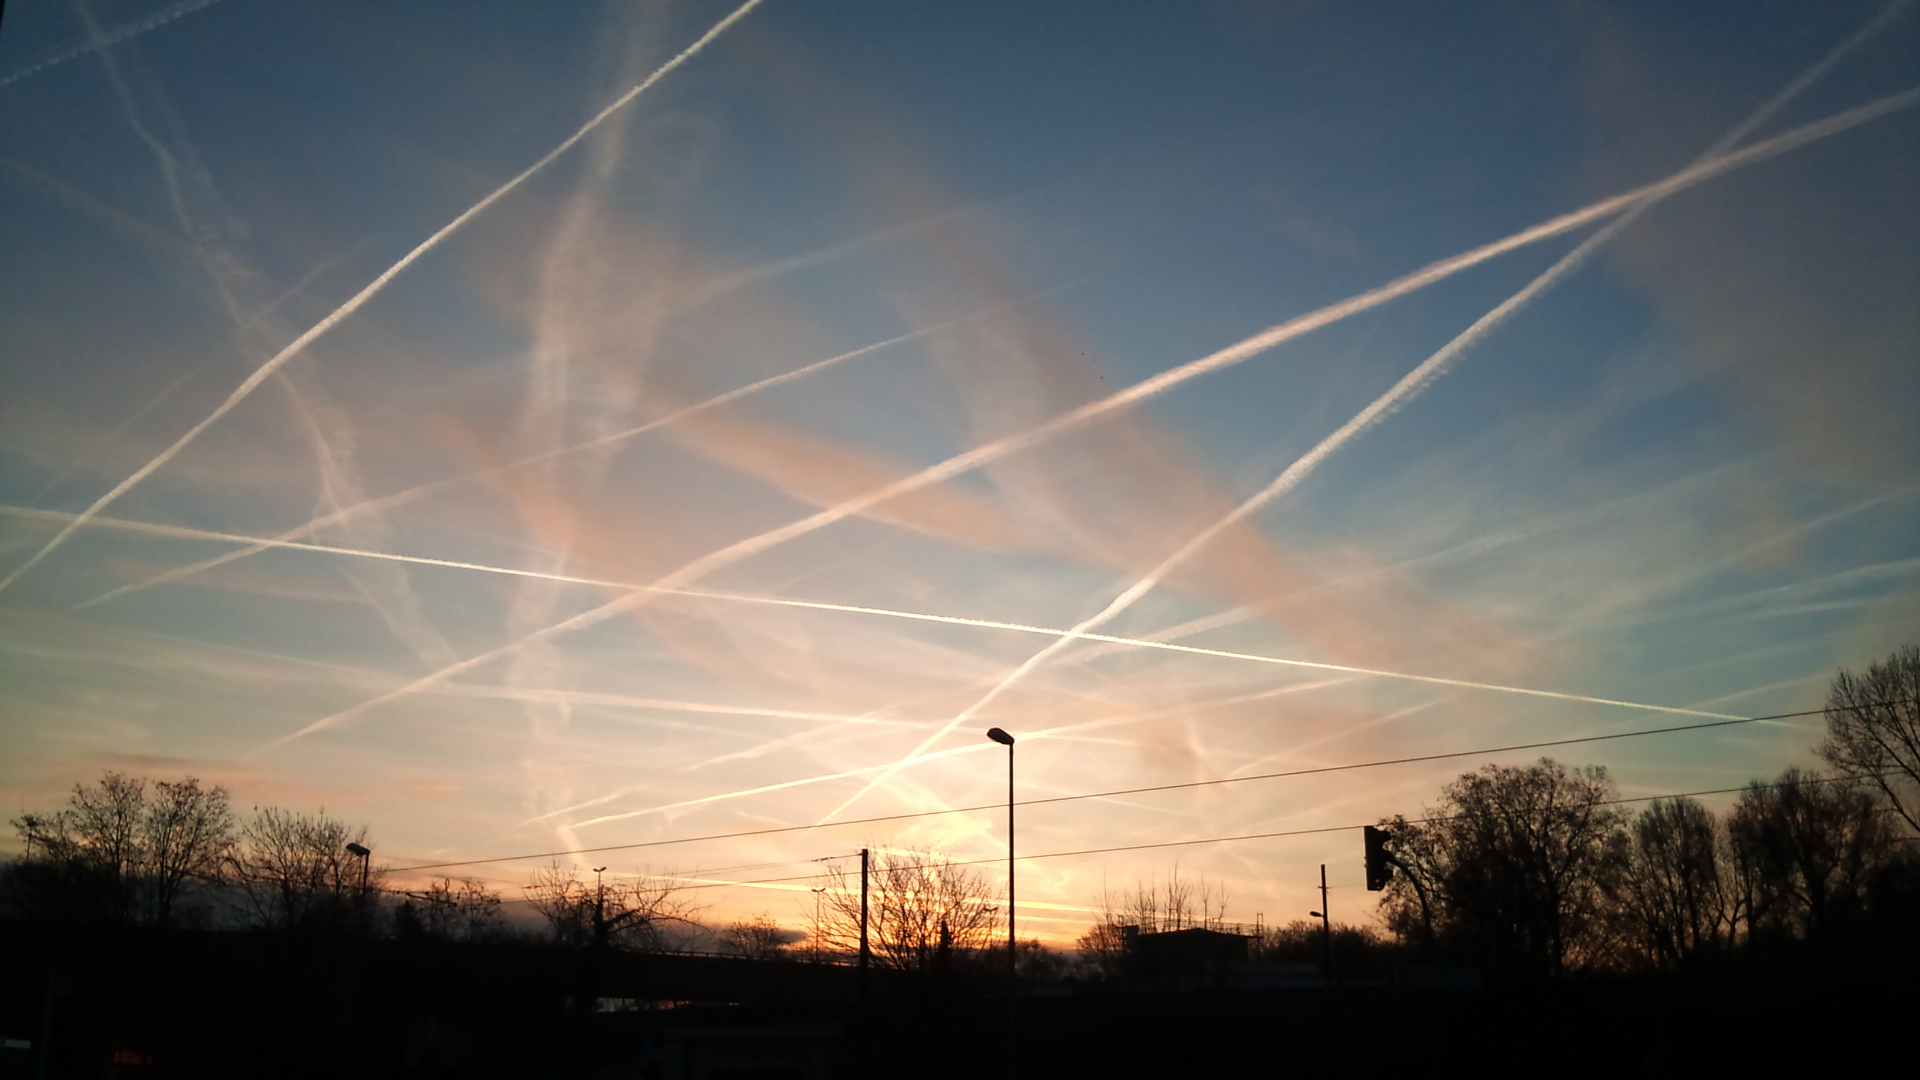 After mocking “chemtrails” for over a decade, global elites suddenly announce geoengineering plan to “dim the sun” with aerial spraying